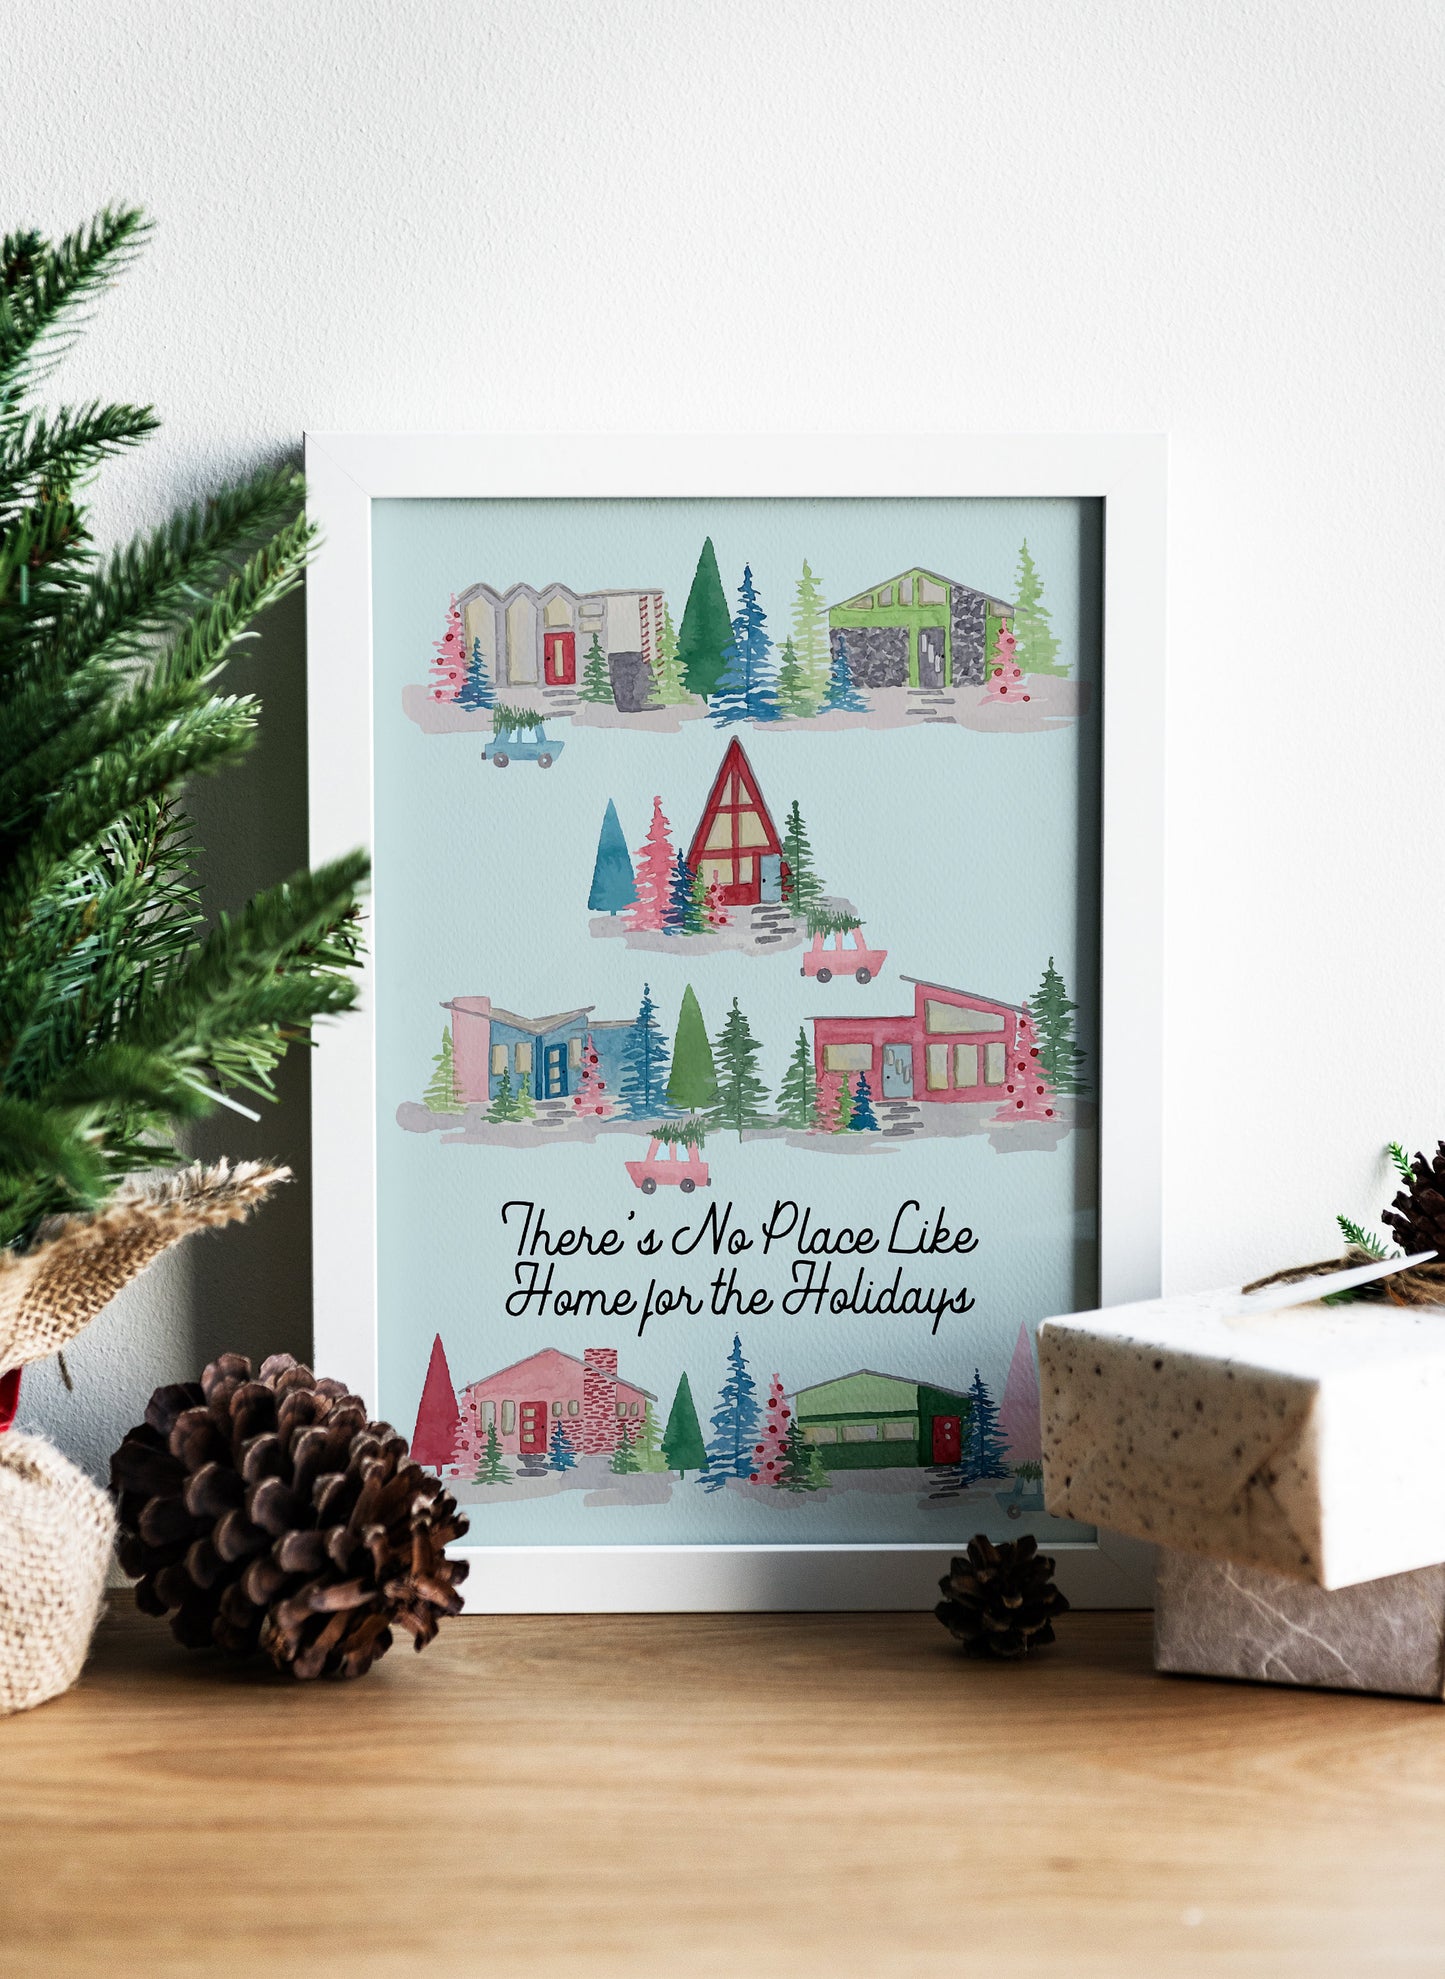 Theres No Place Like Home for the Holidays, Watercolor Retro Houses, Digital Download Printable Artwork, Christmas Fine Art Print